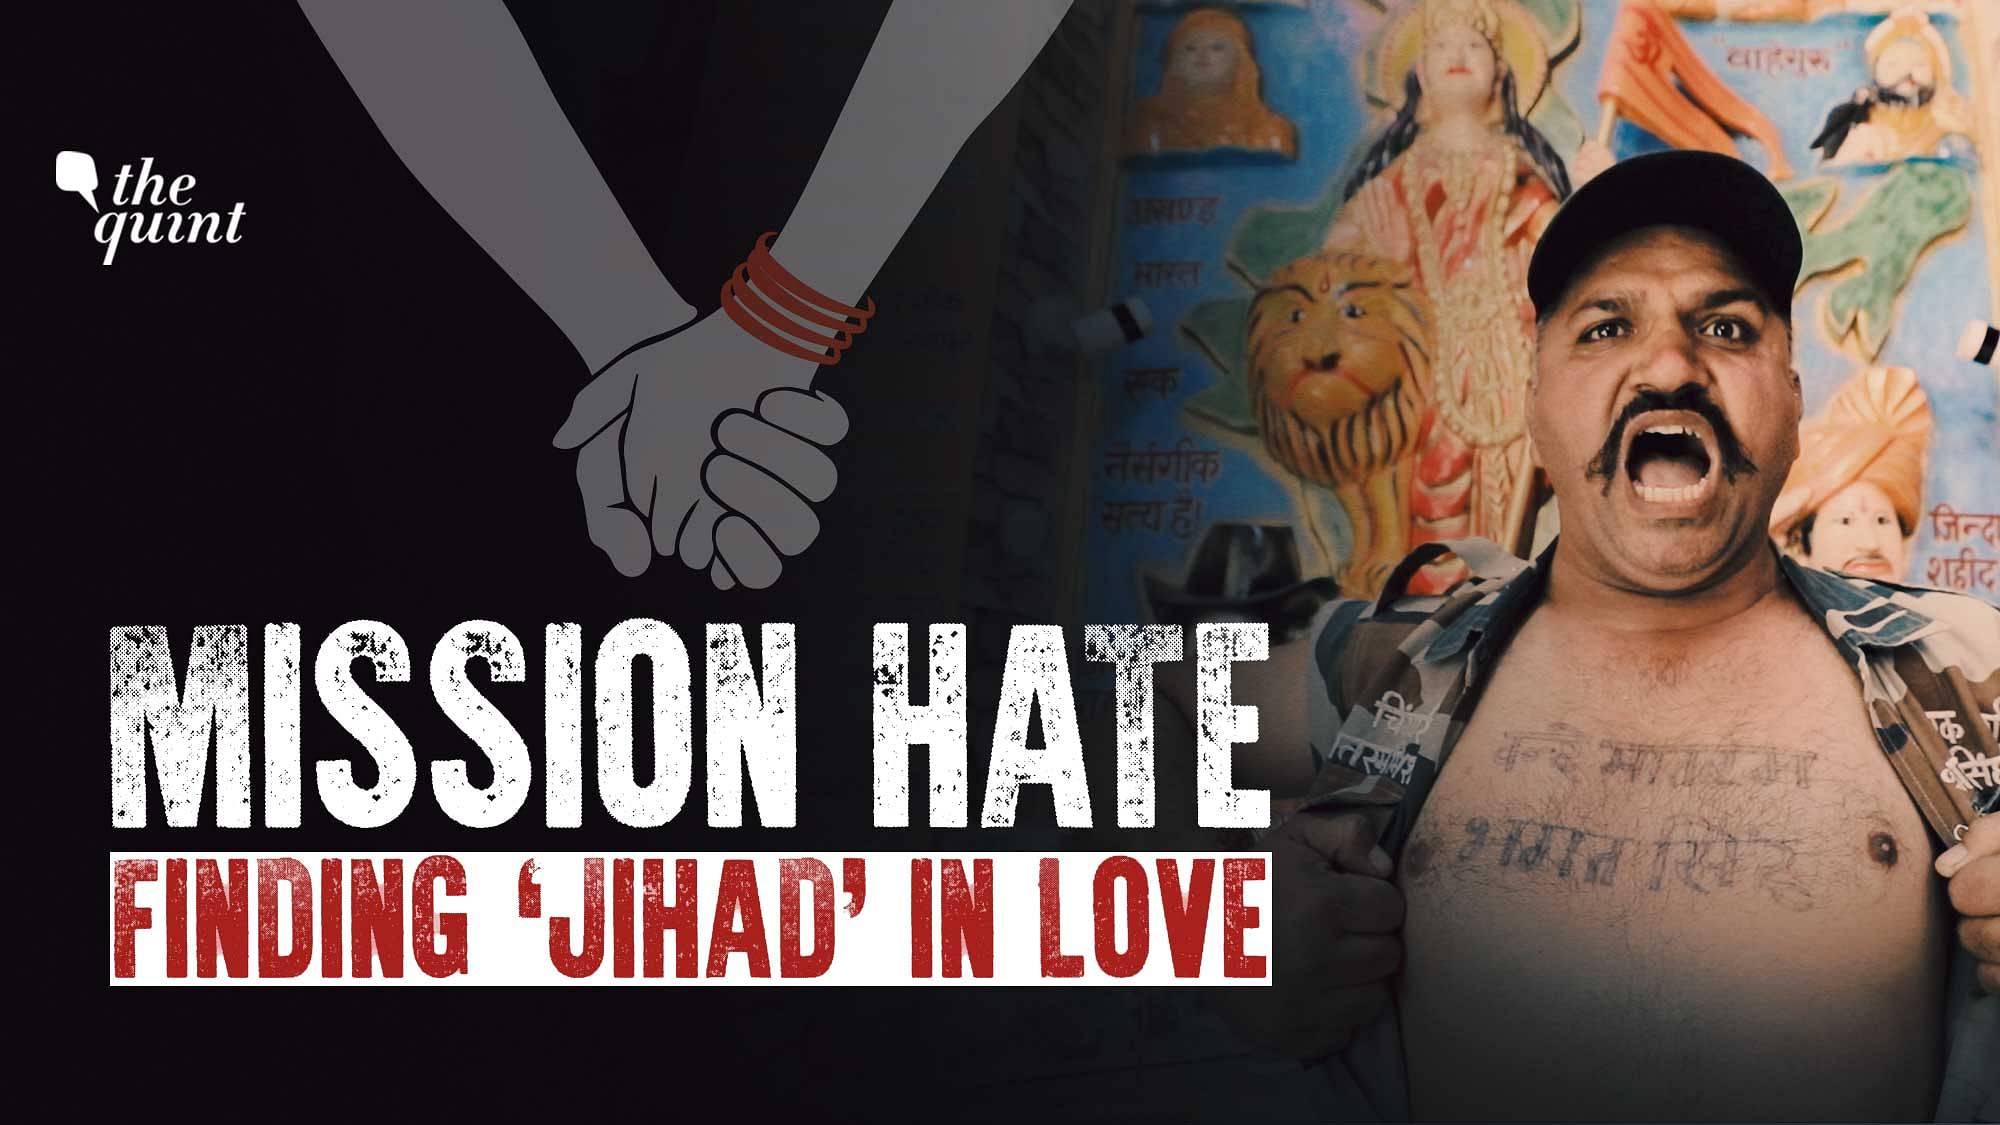 A documentary that lays bare the politics and human cost of the ‘Love Jihad’ campaign in India.